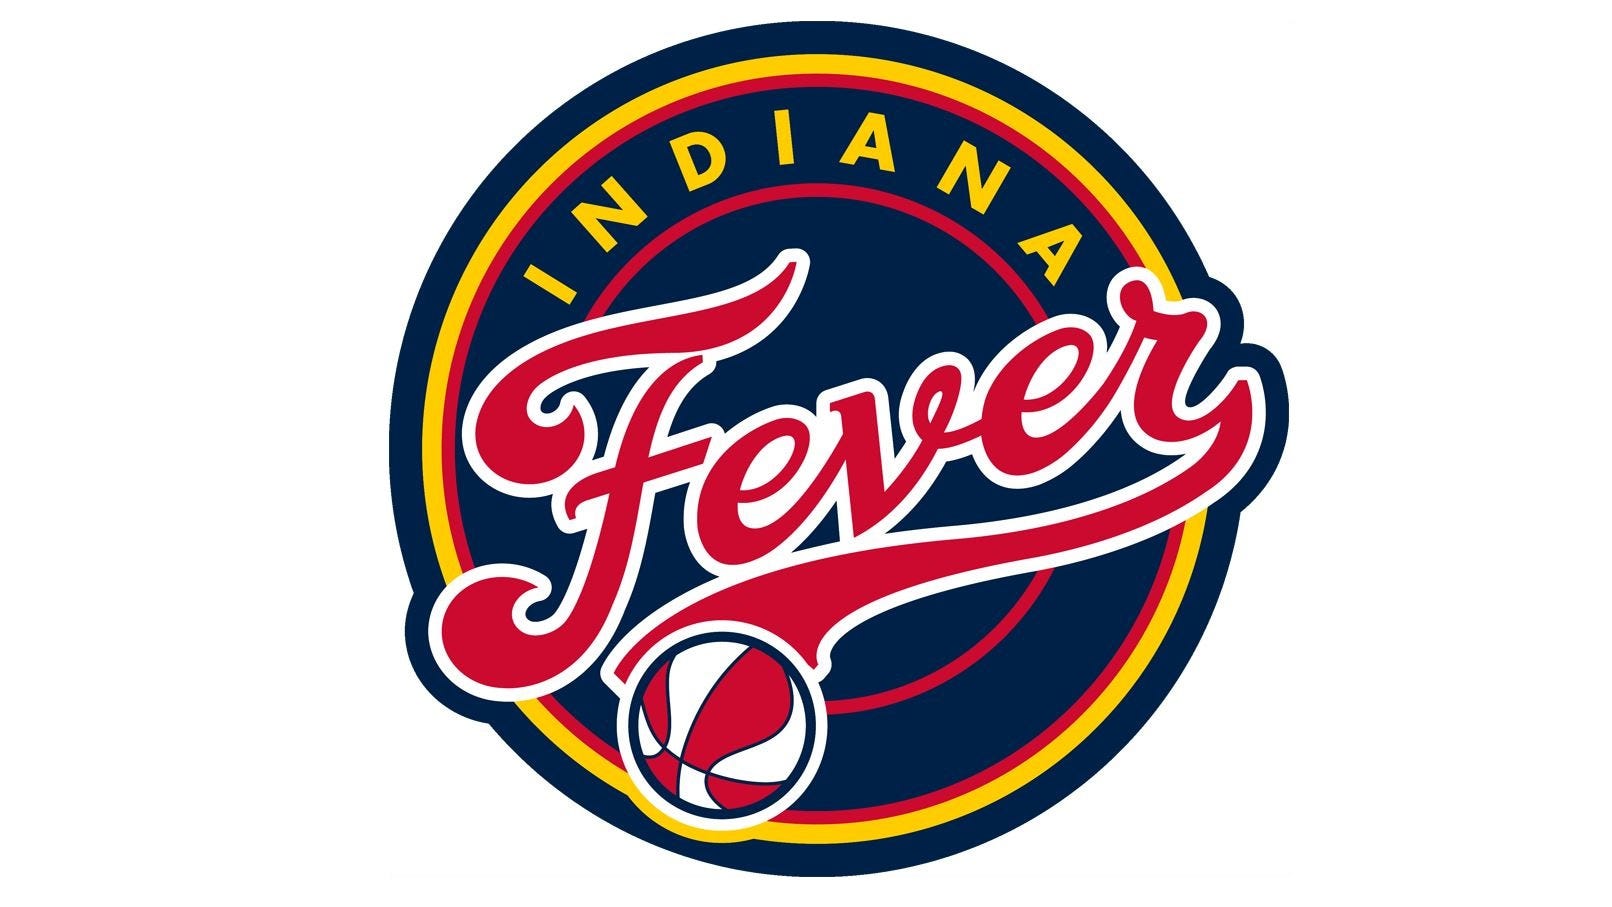 Indiana Fever activism "Talk is cheap, time for some action."